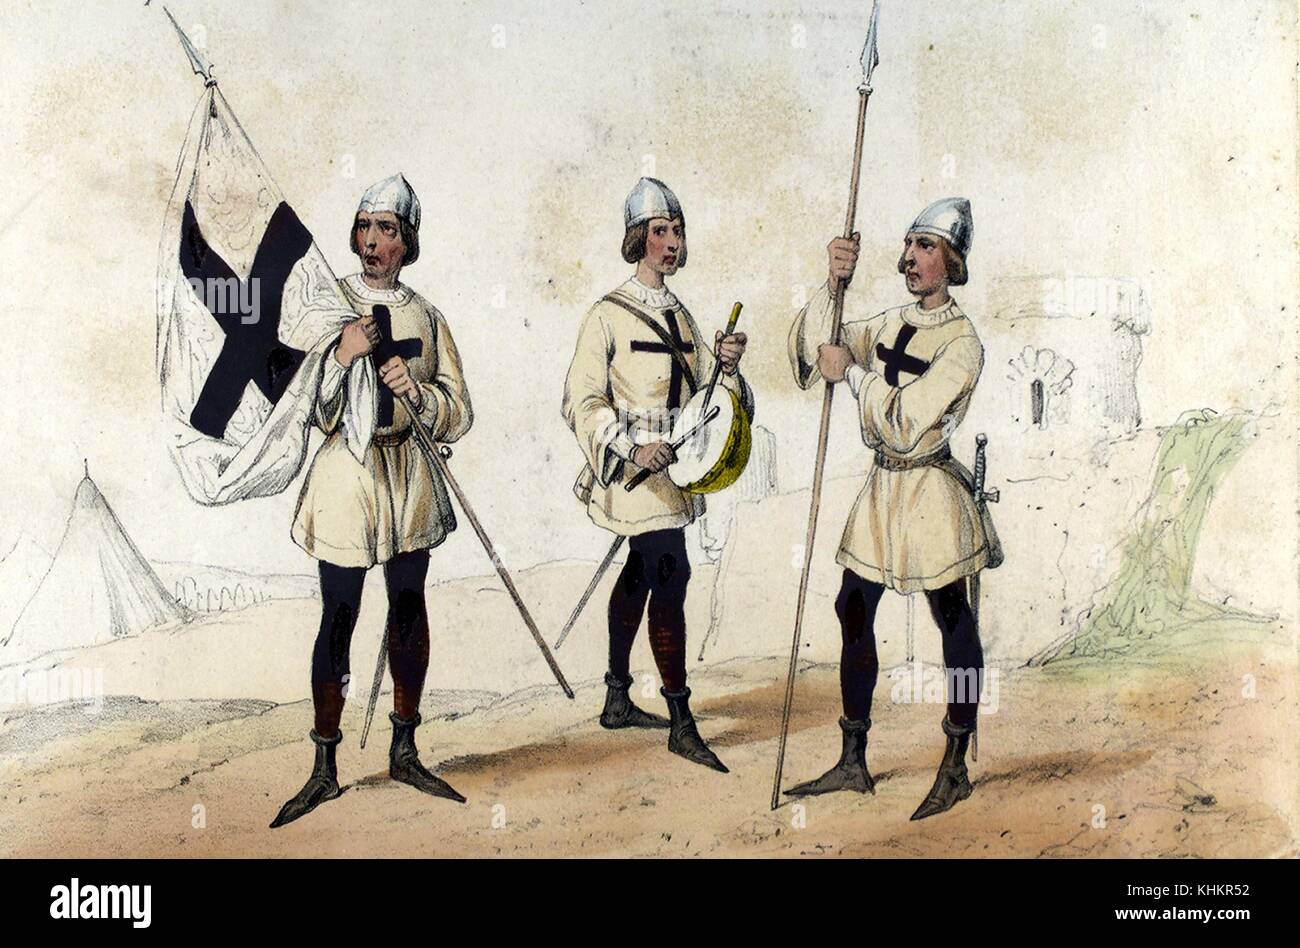 Color lithograph depicting three soldiers of the Holy Brotherhood circa 1490, constabulary created in the late 15th century by the Catholic Monarchs (Ferdinand and Isabella) to maintain law and order throughout Spain, from the book Album de la Infanteria Espanola, by General Conde de Clonard, 1861. From the New York Public Library. Stock Photo